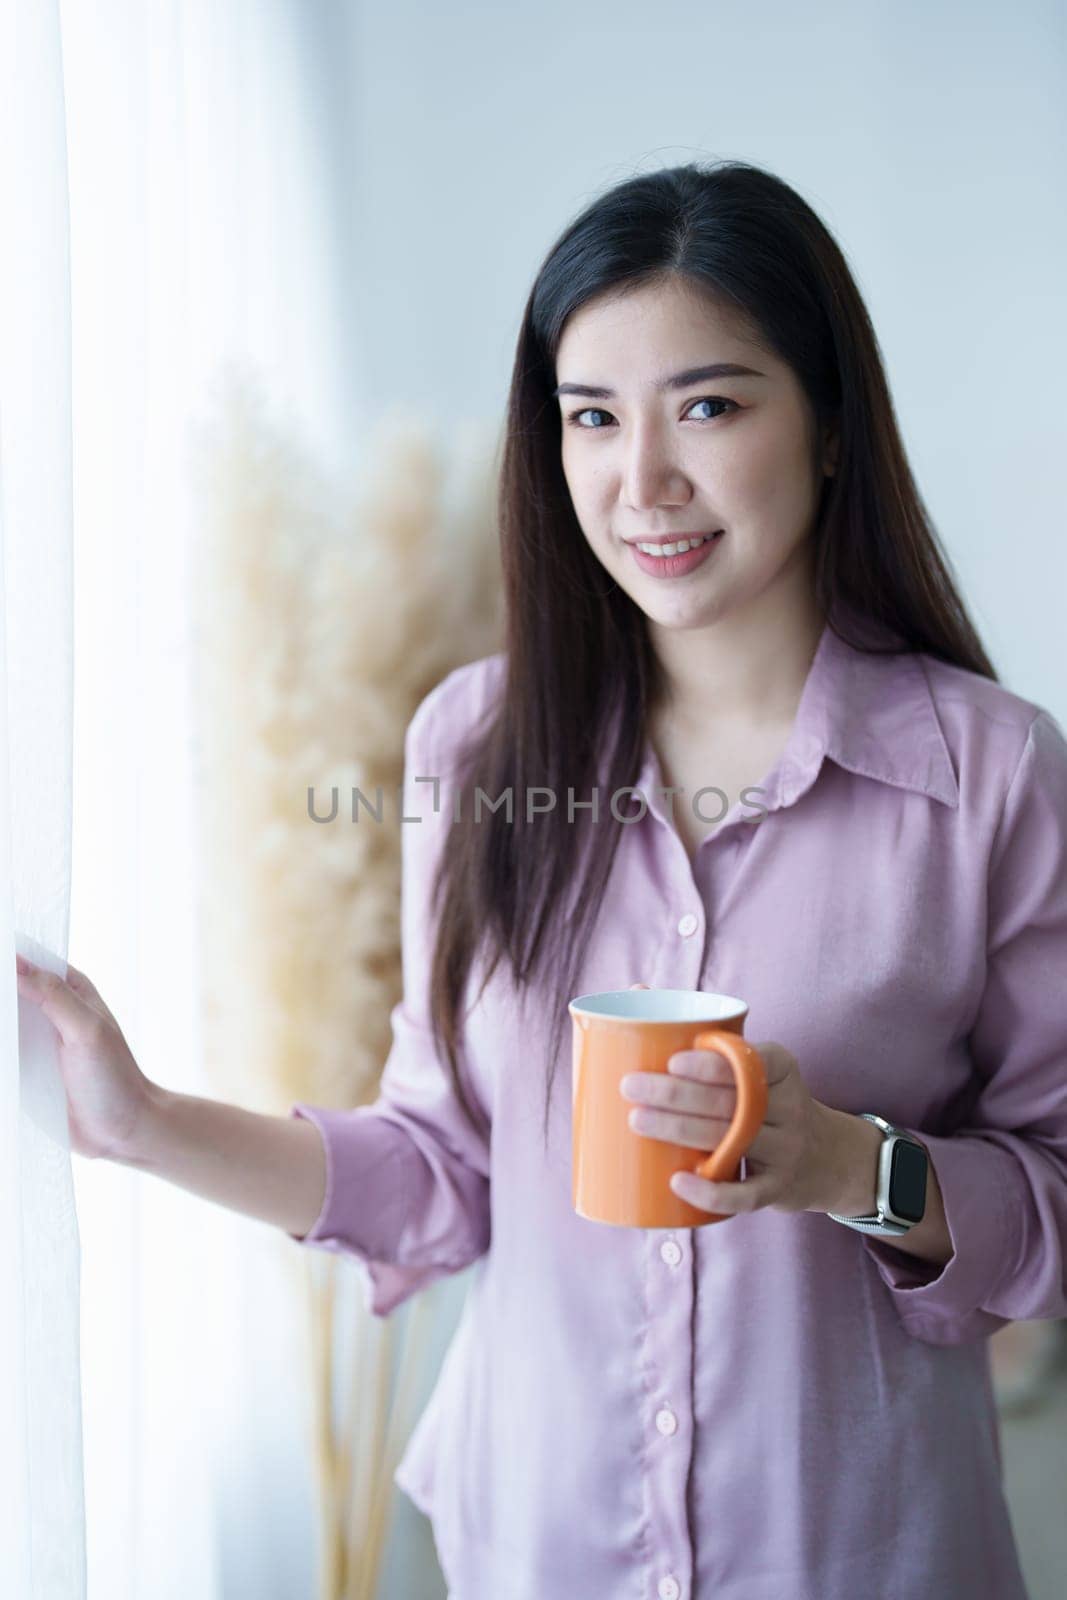 A portrait of a young Asian woman in pajamas smiling happily by a window with curtains in the morning sun while drinking coffee by Manastrong